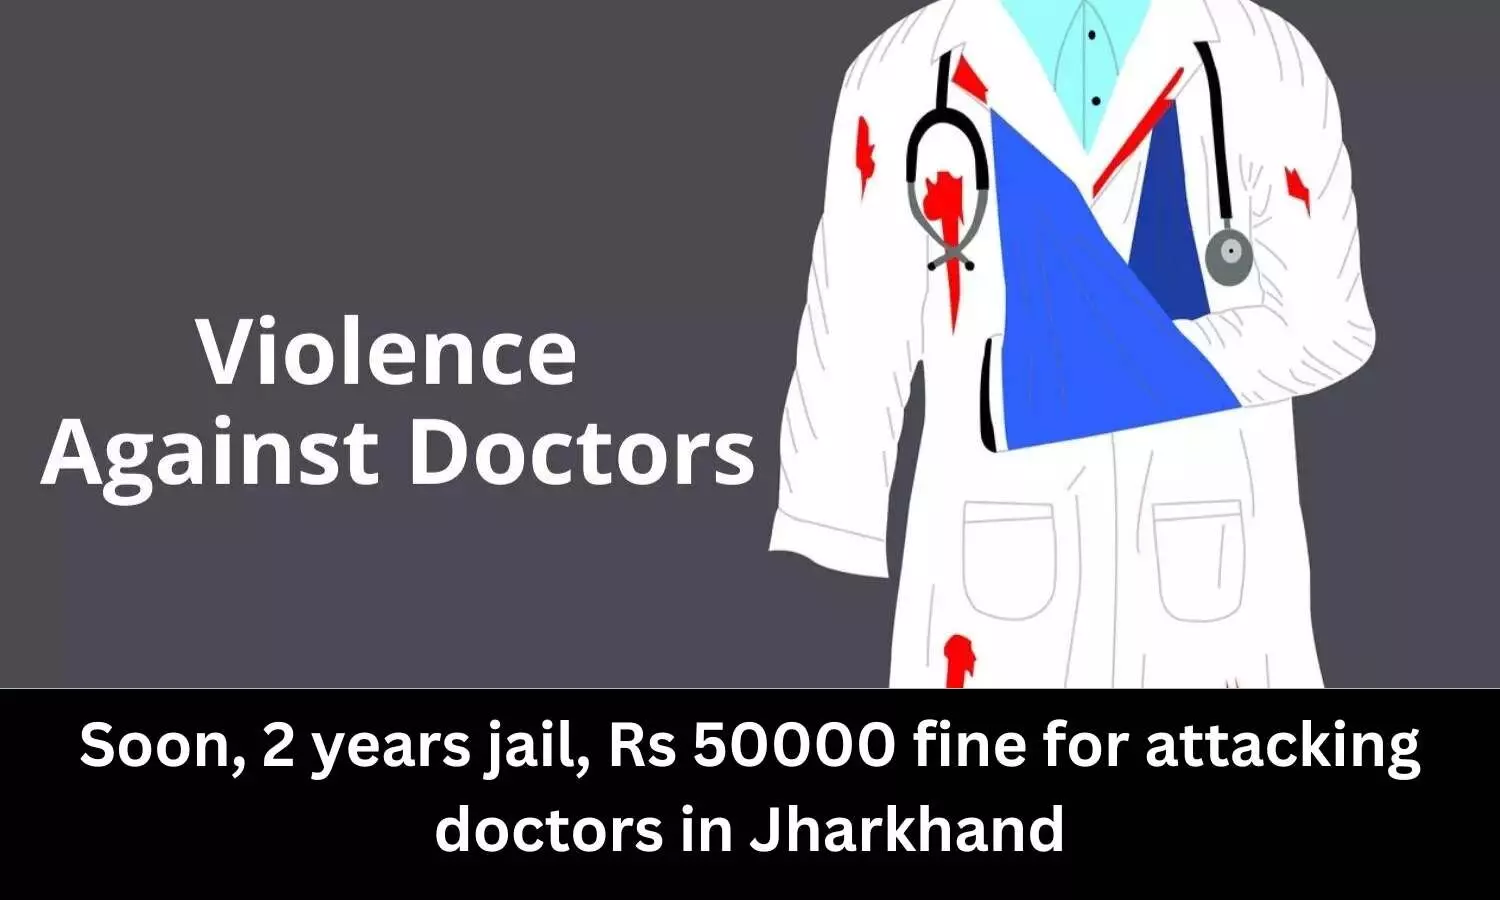 Soon, 2 years jail, Rs 50000 fine for attacking doctors in Jharkhand